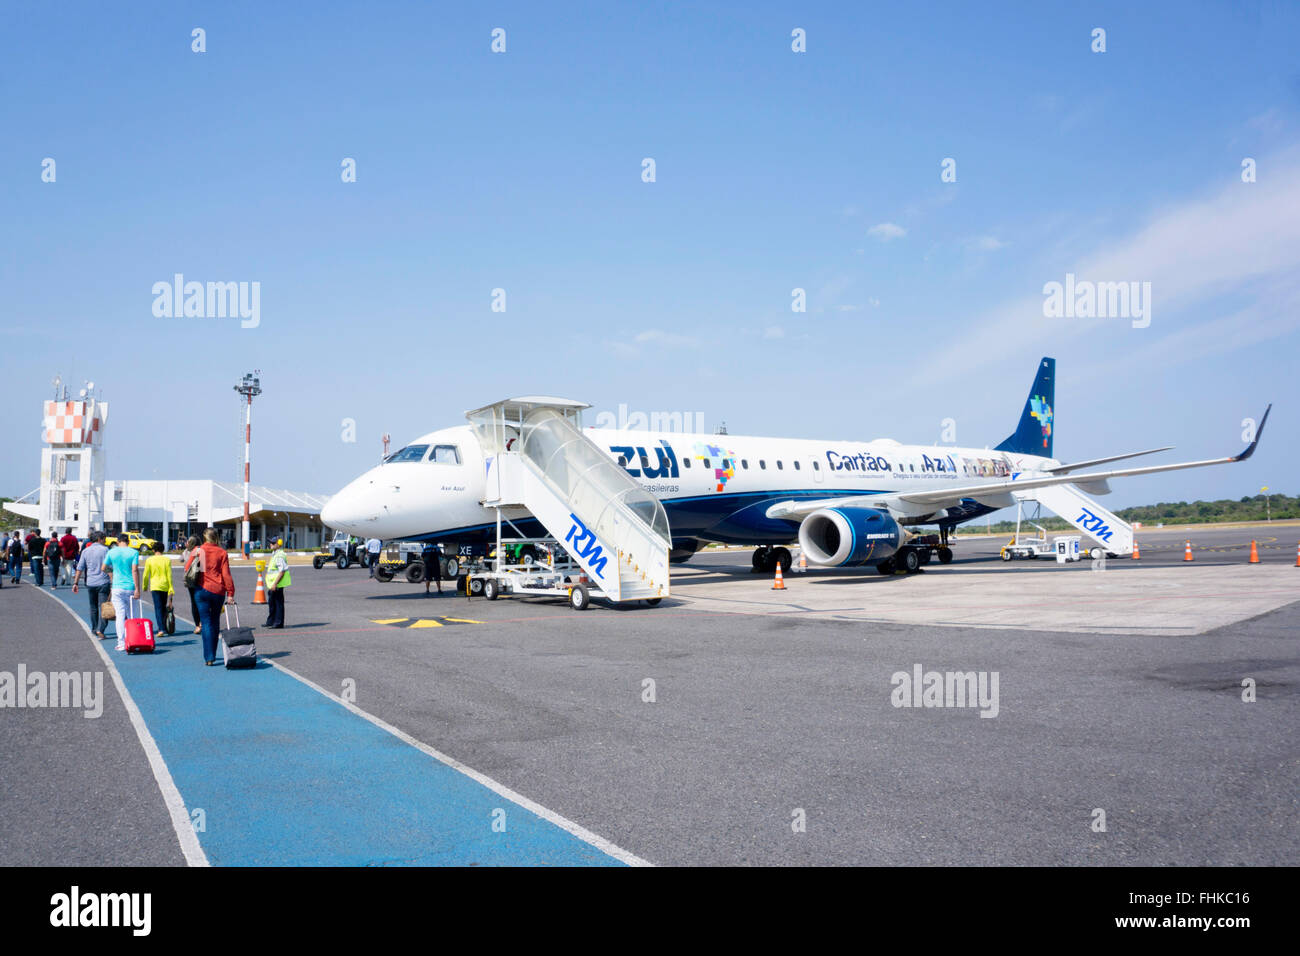 Azul Embraer jets on the runway at an airport in Brazil Stock Photo